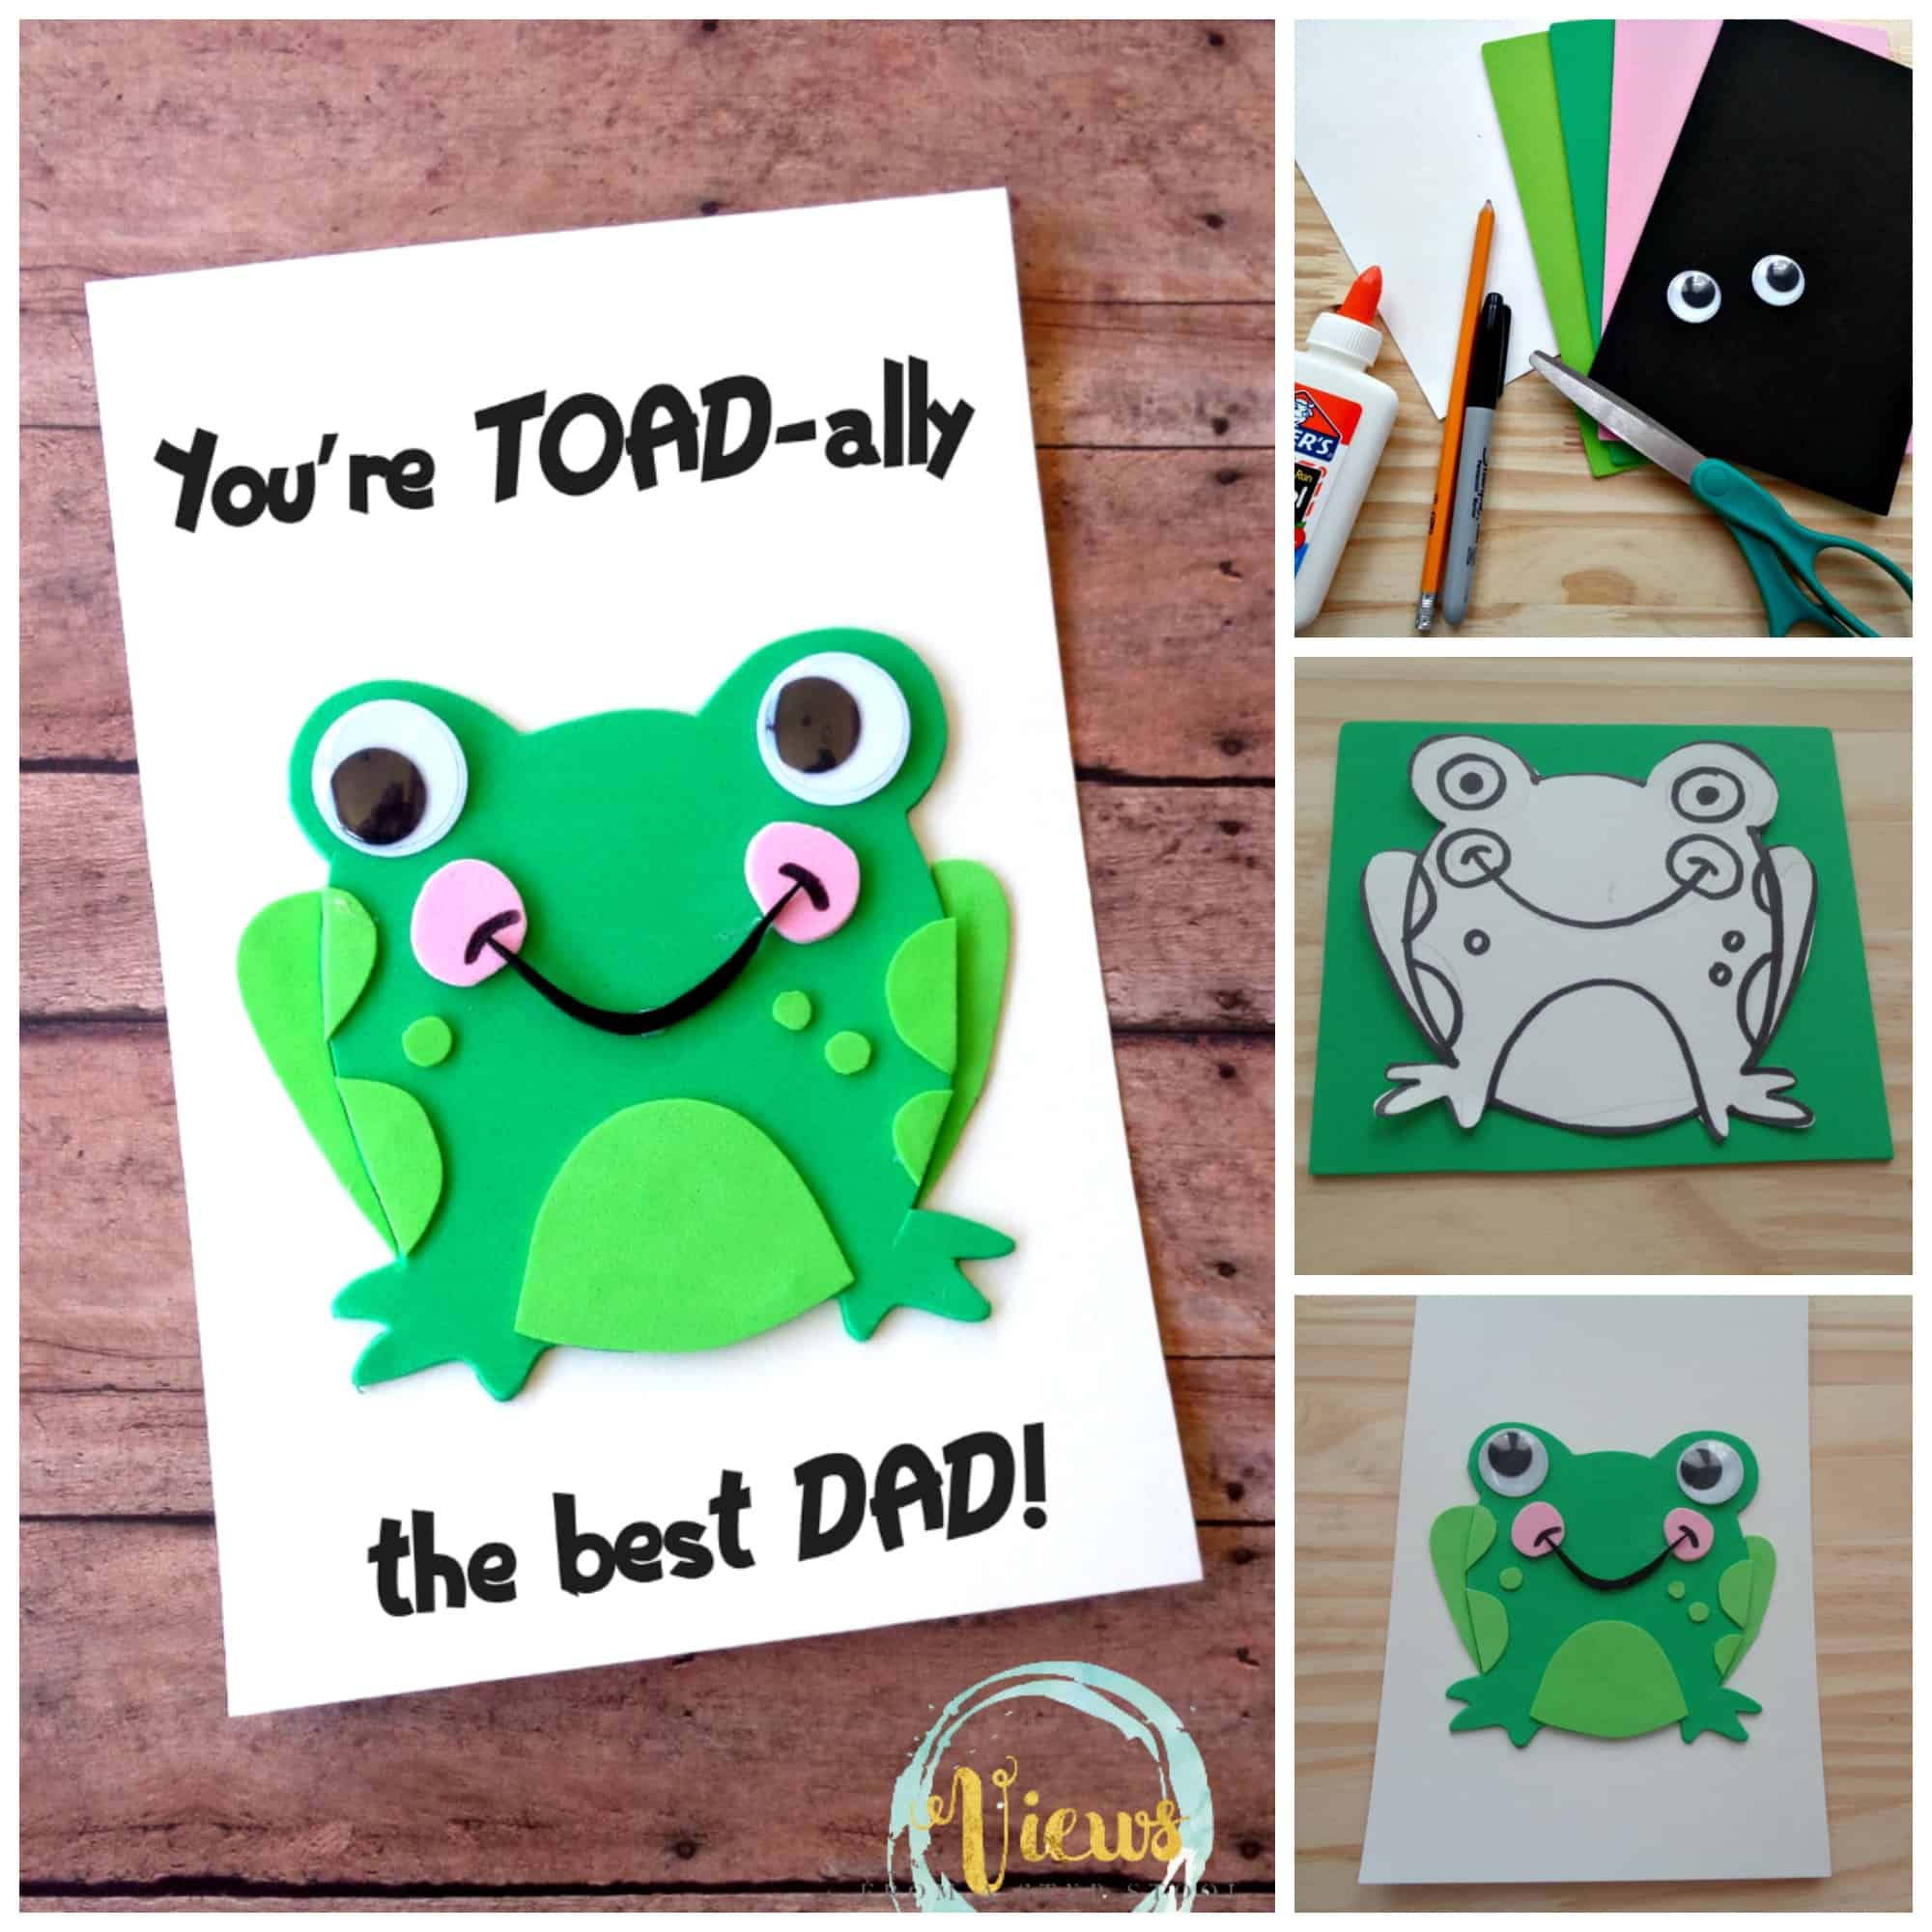 This toad-inspired handmade Fathers Day card is perfect for kids to make for the dad in their lives. They will love crafting and giving this one!